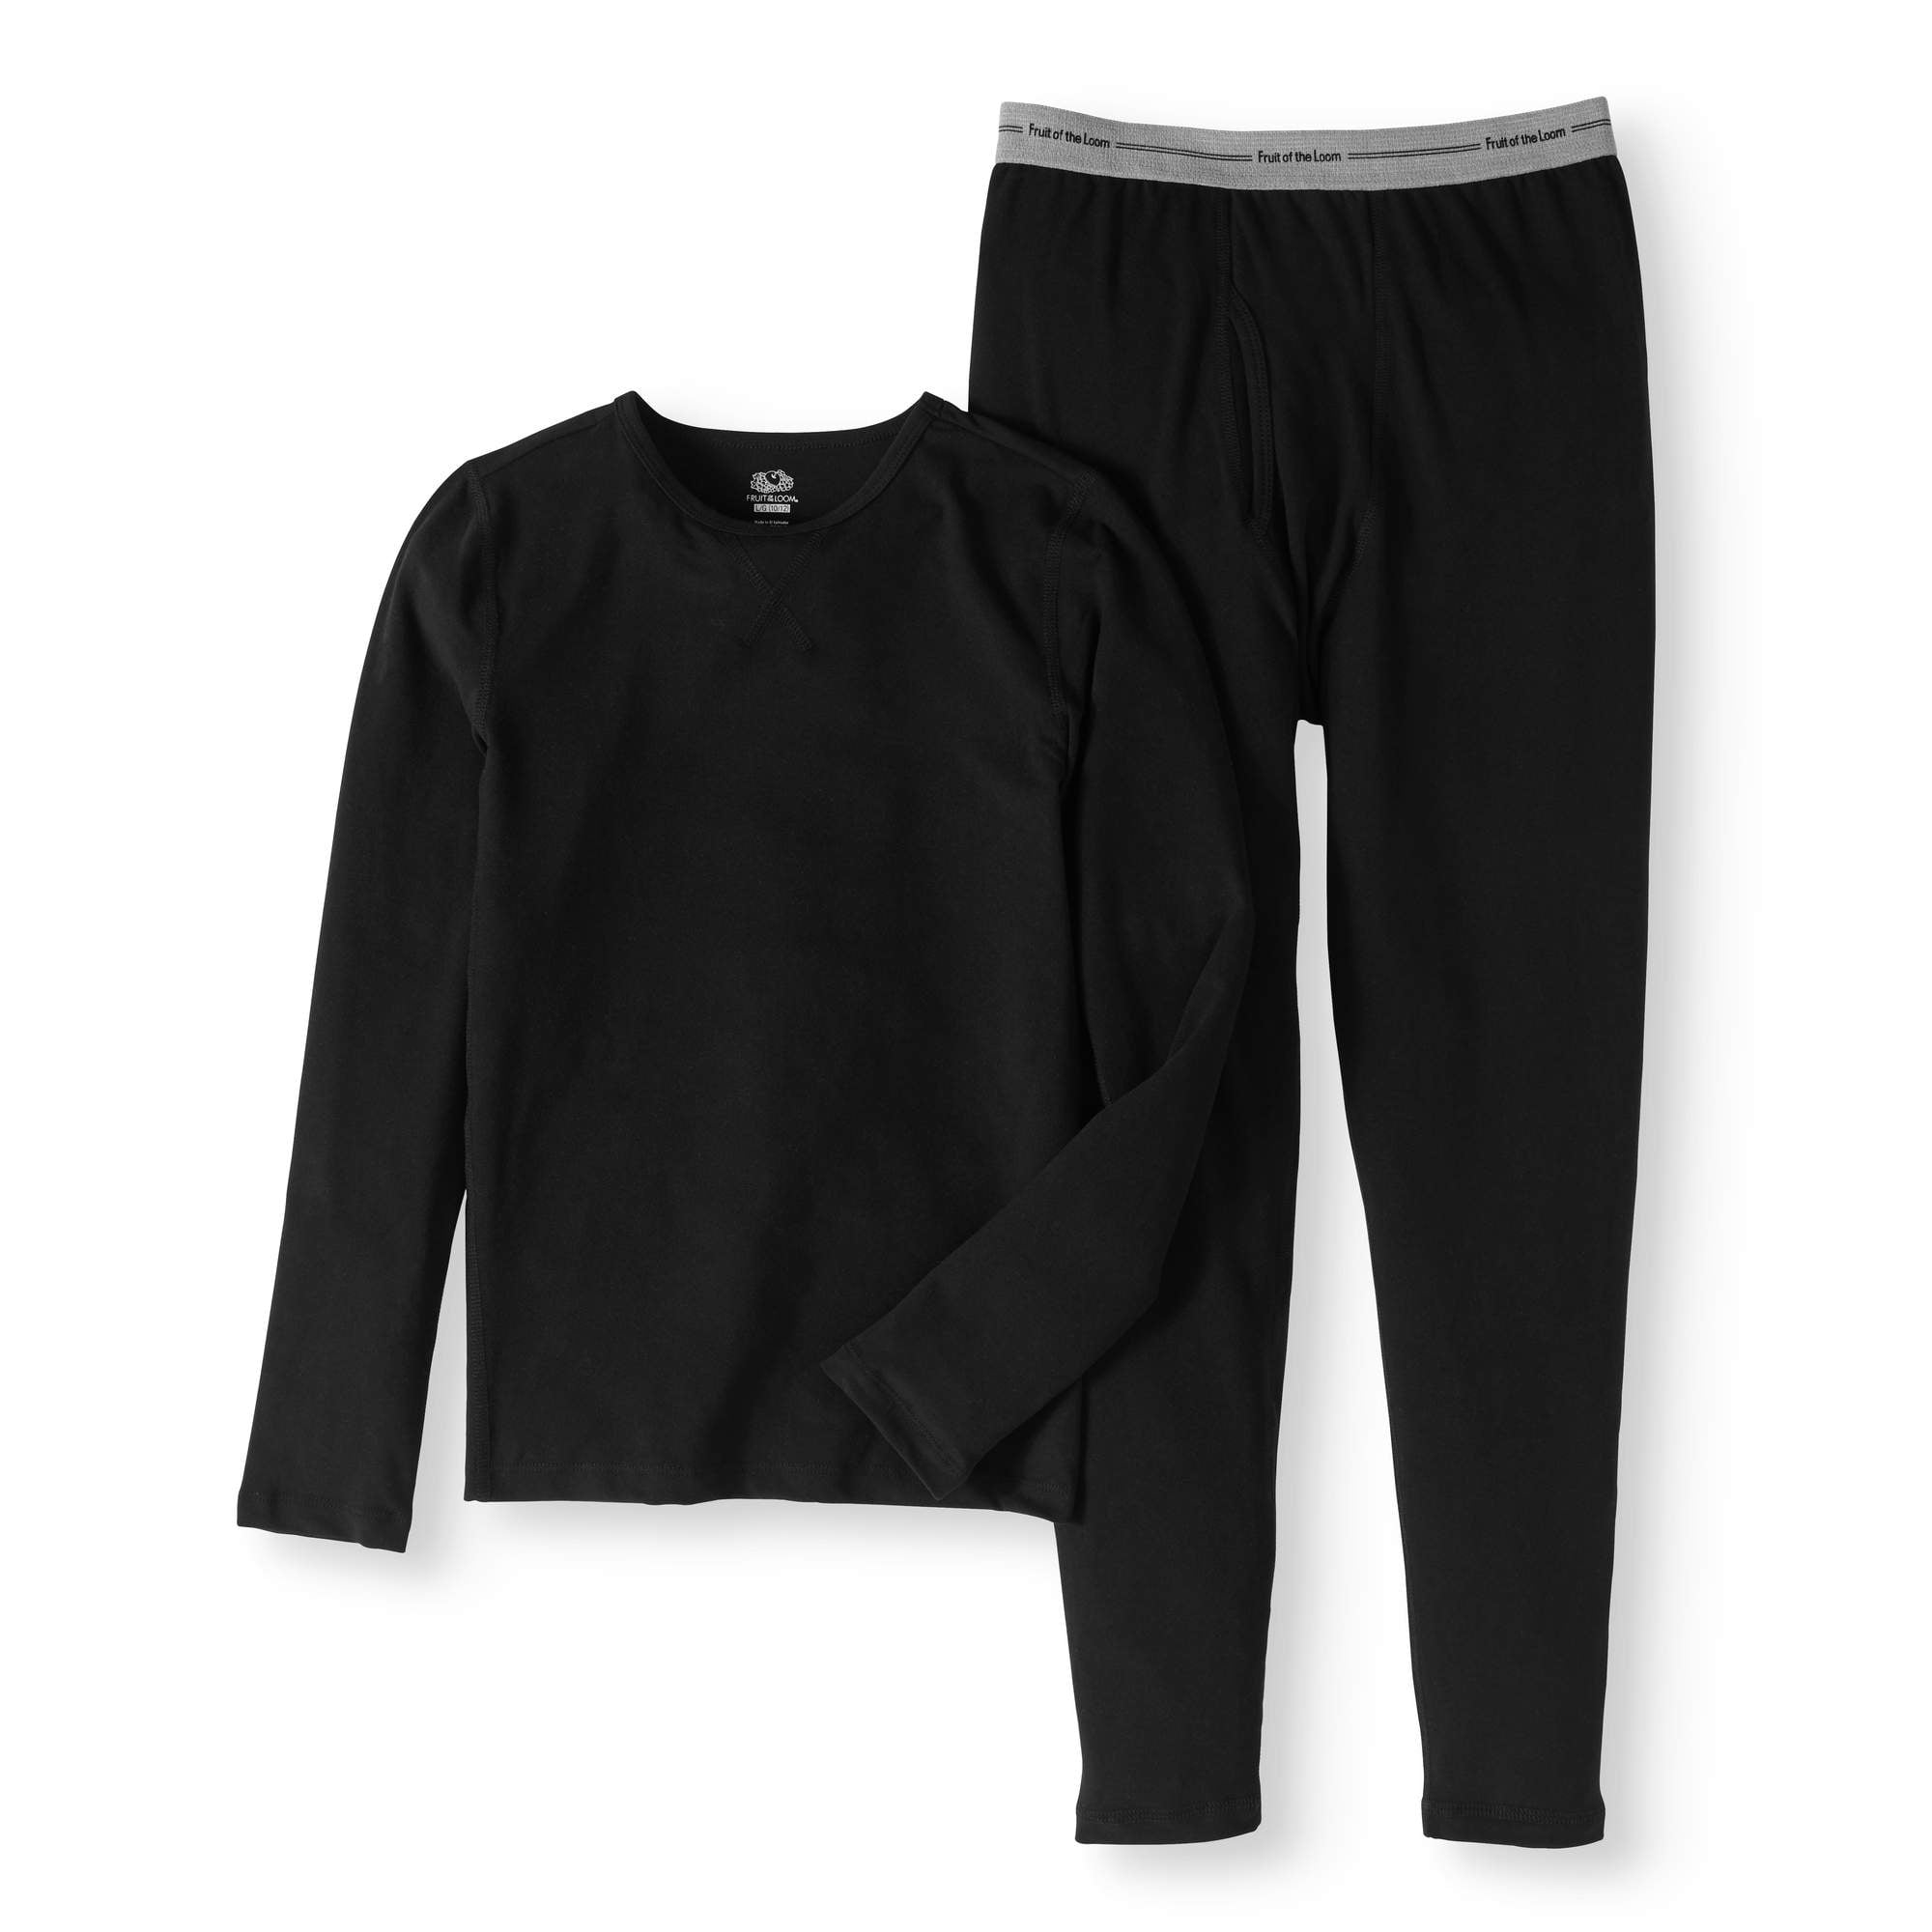 Details about   New Fruit of The Loom Boys Thermal Underwear Set Beyond Soft Black 